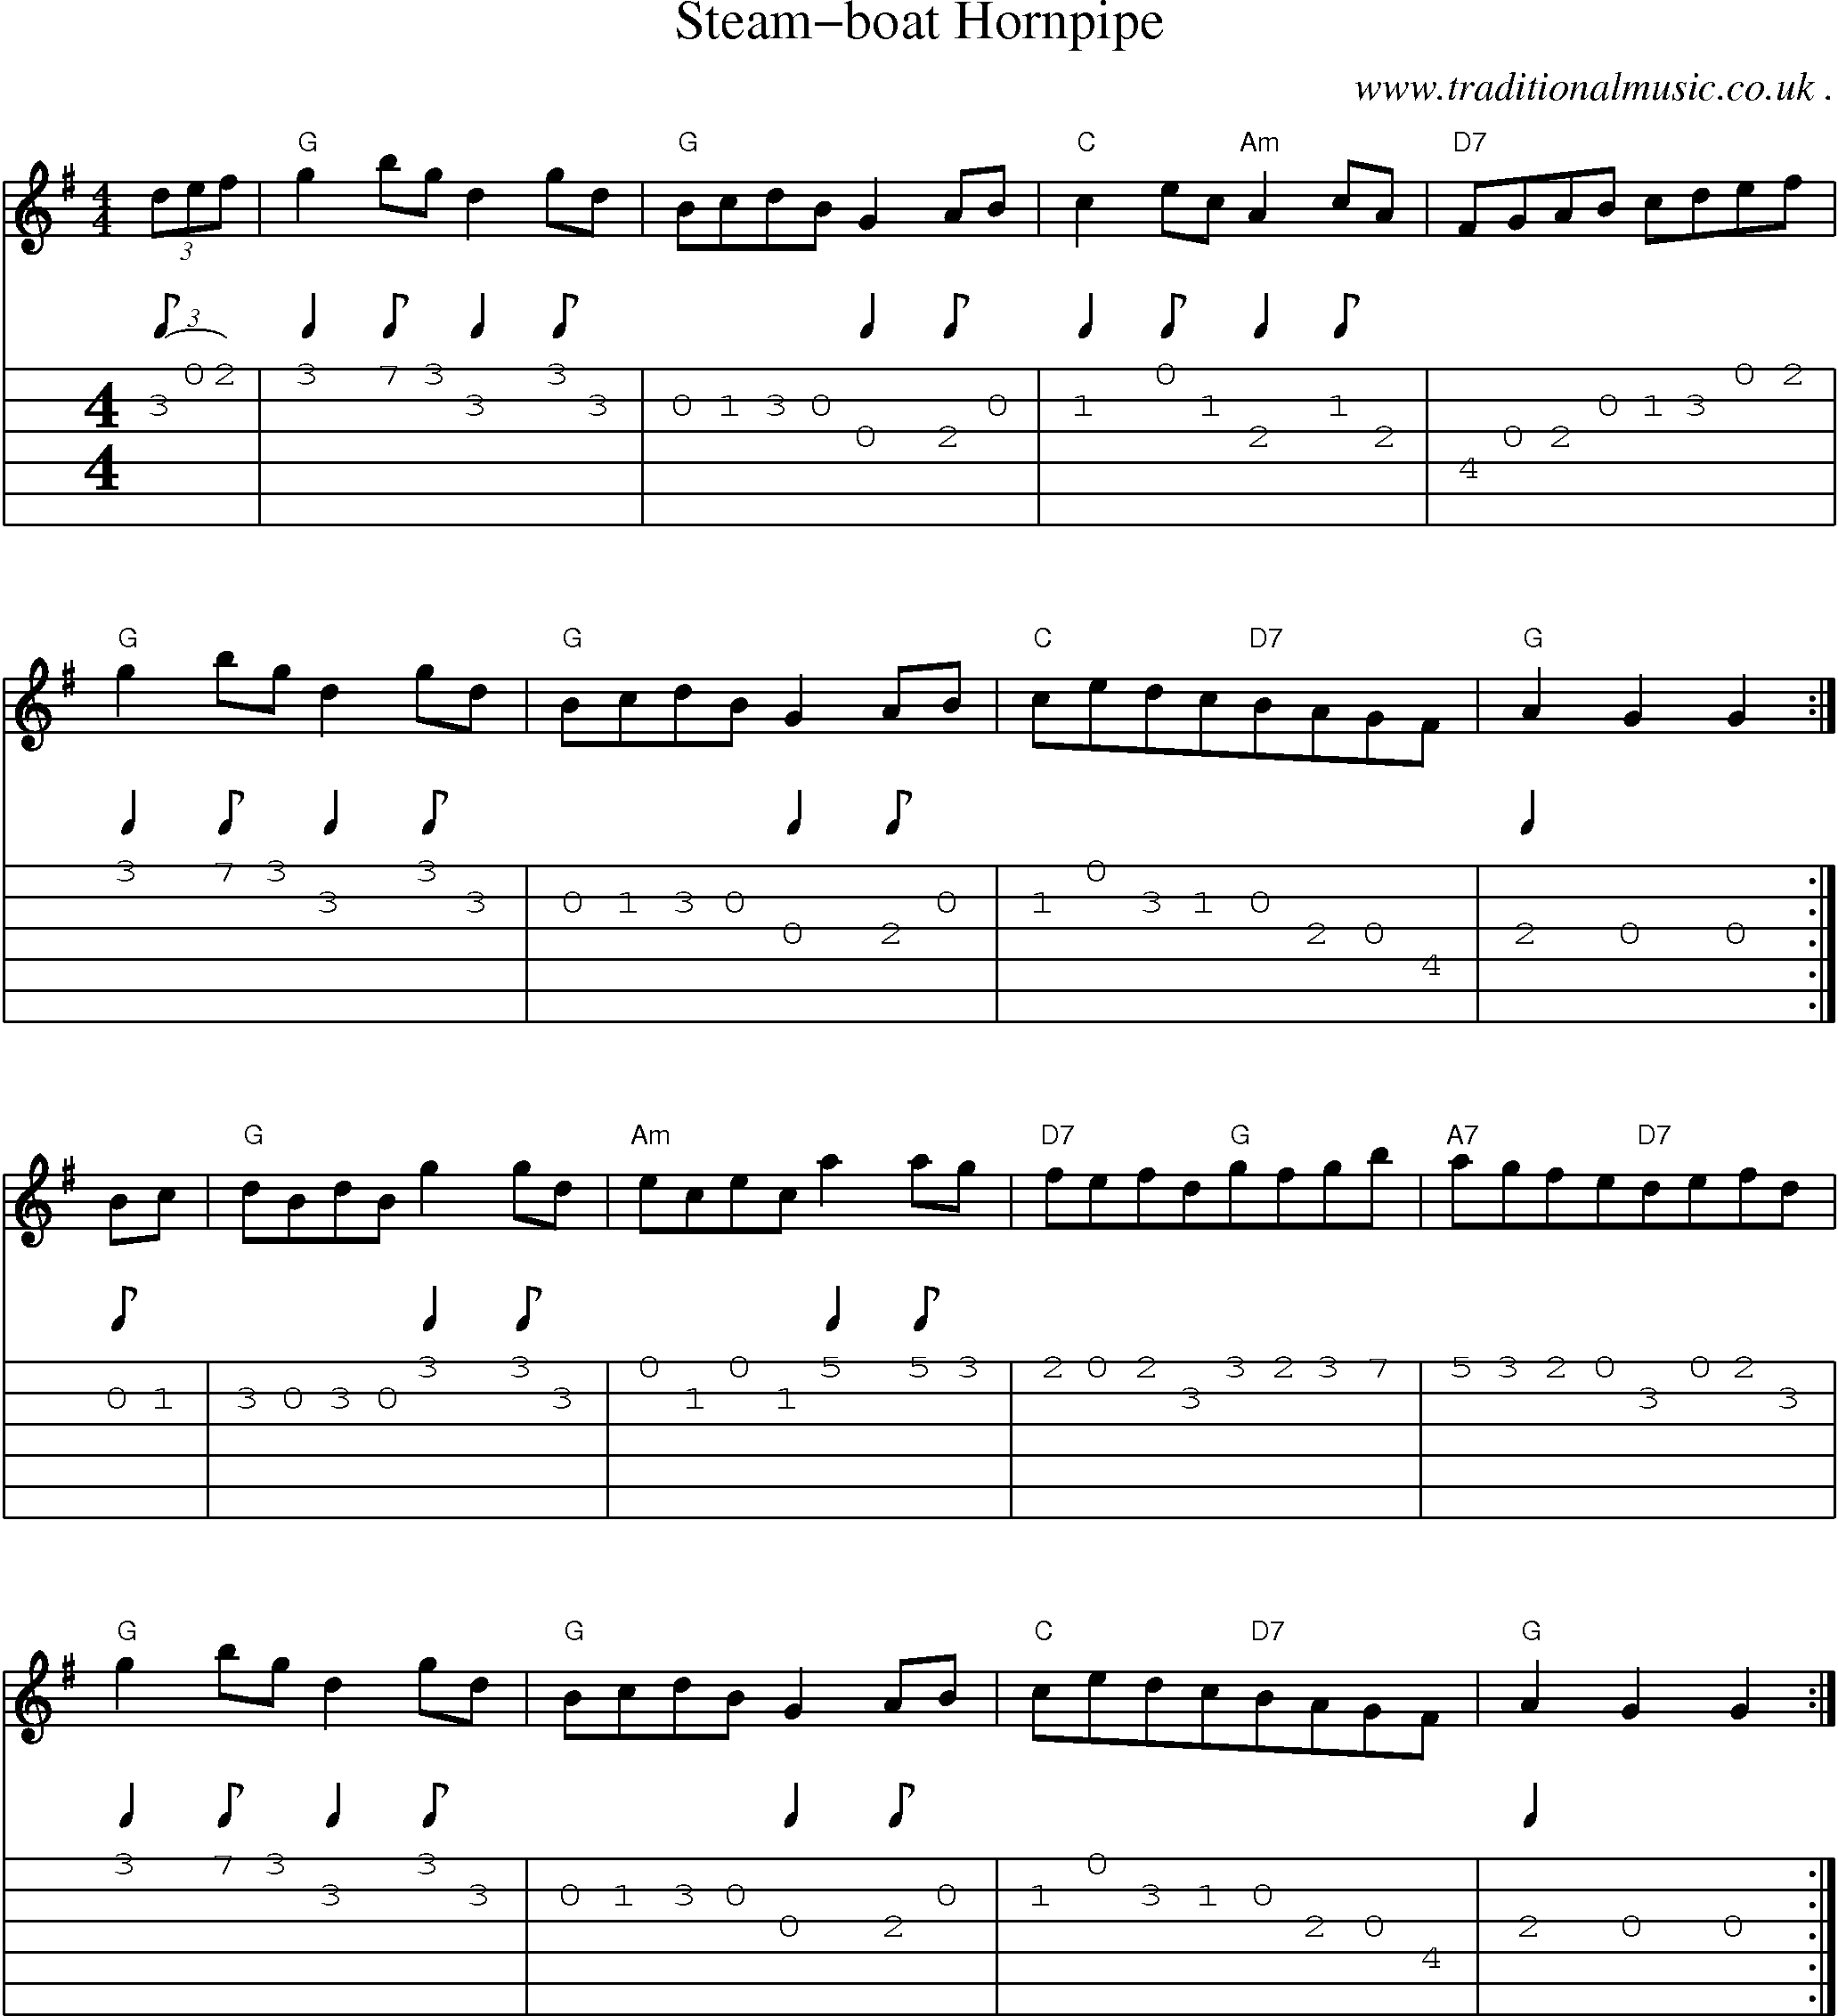 Sheet-Music and Guitar Tabs for Steam-boat Hornpipe